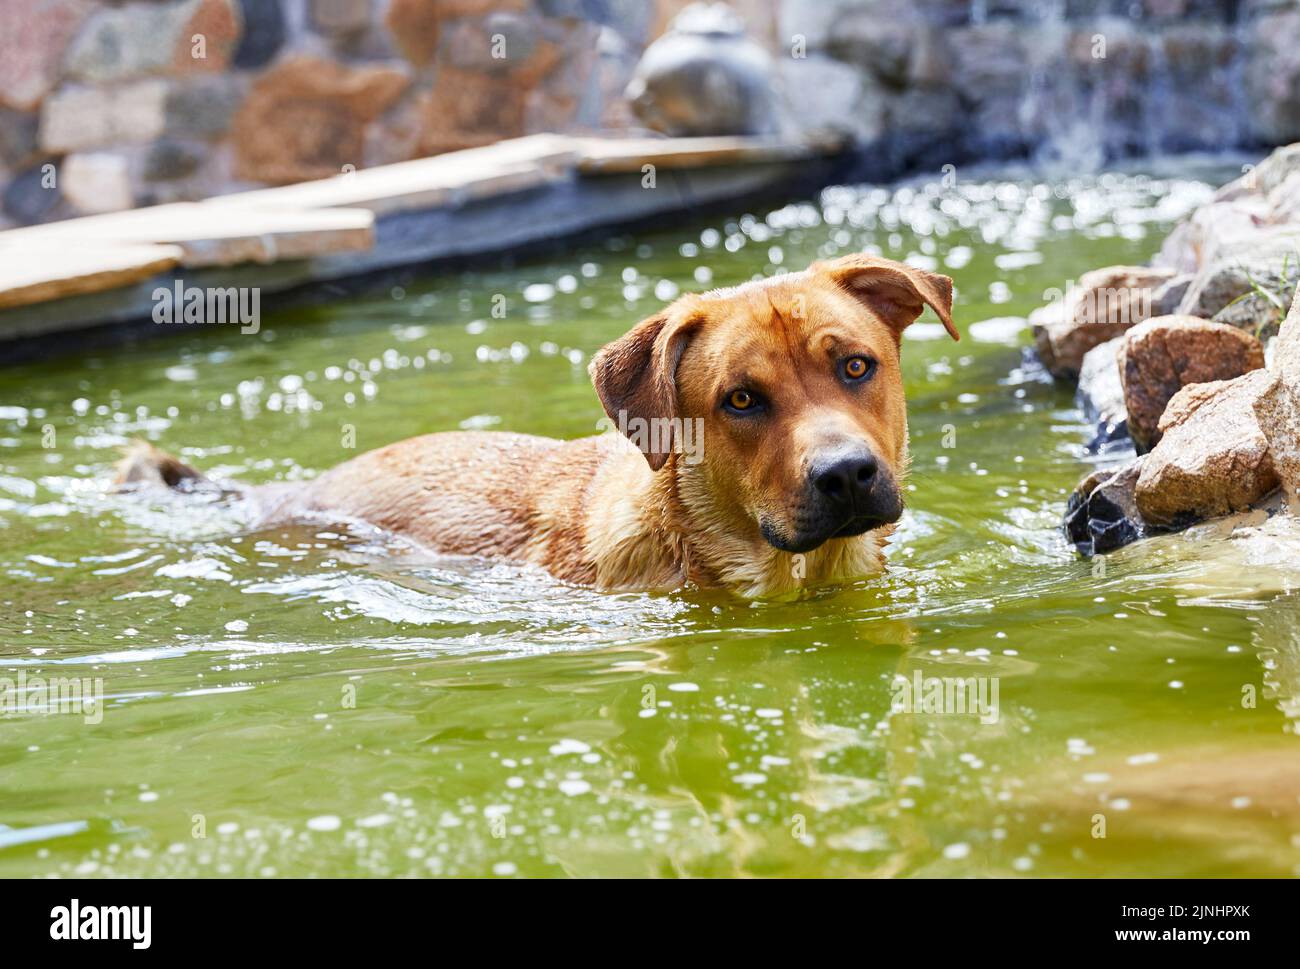 Mixed breed dog swimming in a pond Stock Photo